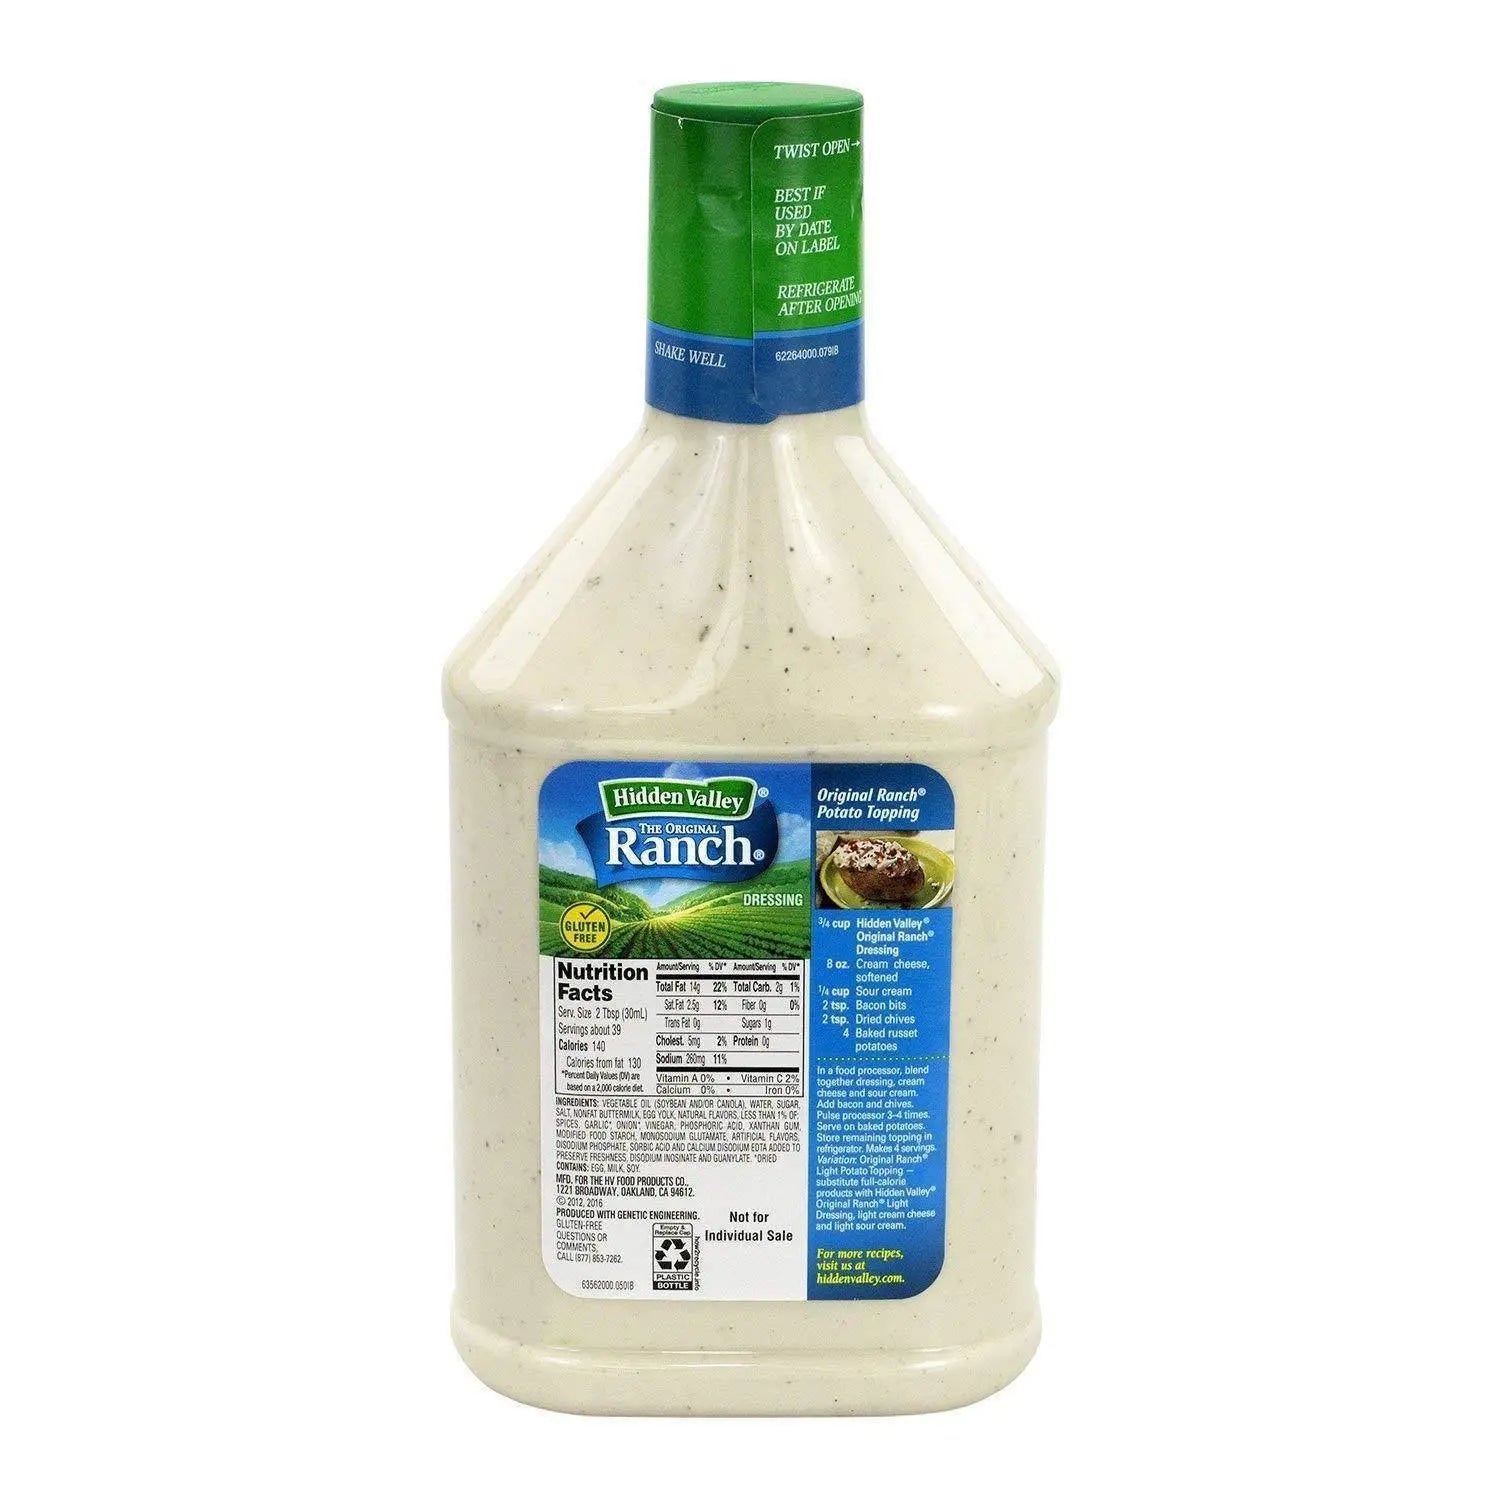 Wholesale prices with free shipping all over United States Hidden Valley The Original Ranch Dressing - Steven Deals